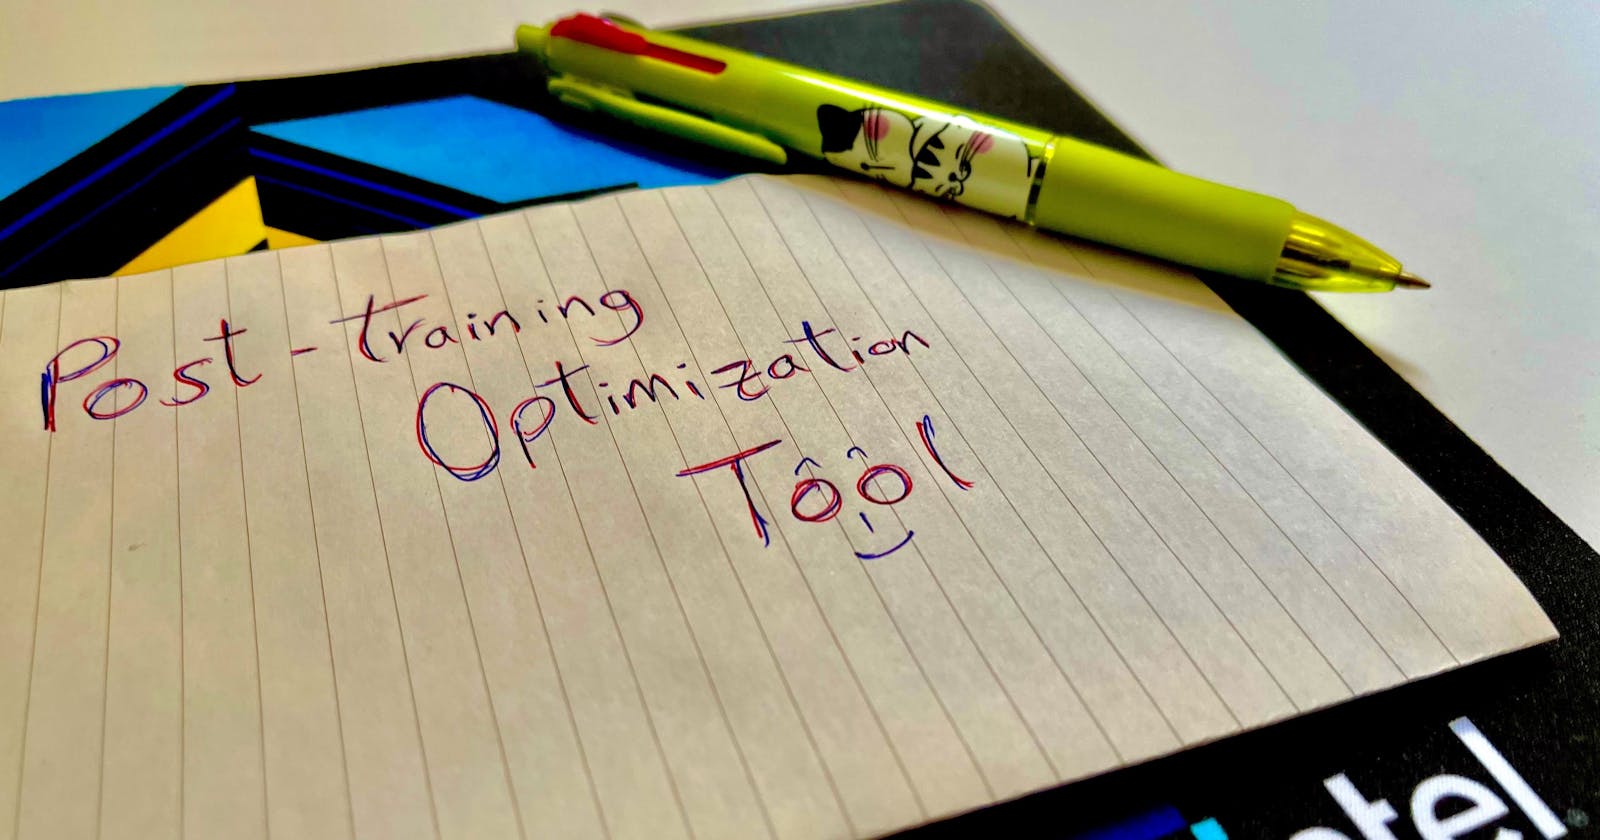 Optimize your Deep Learning models with Post-Training Optimization from Intel OpenVINO